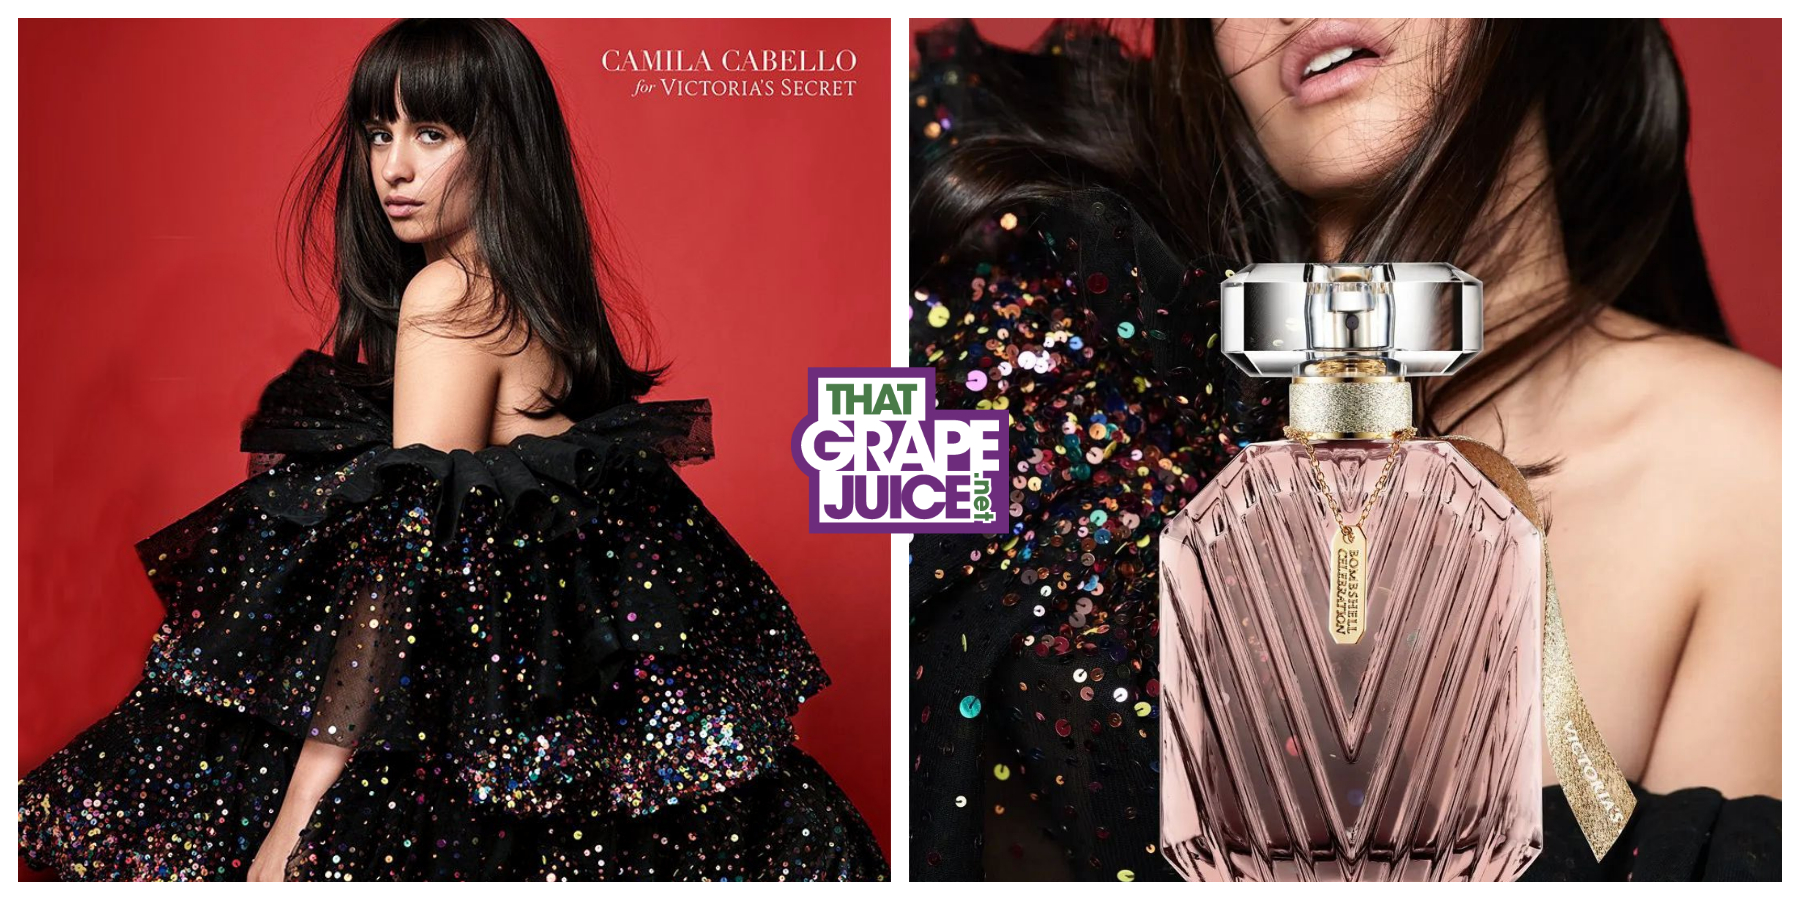 Camila Cabello Shimmers In Ads for New Victoria's Secret Fragrance